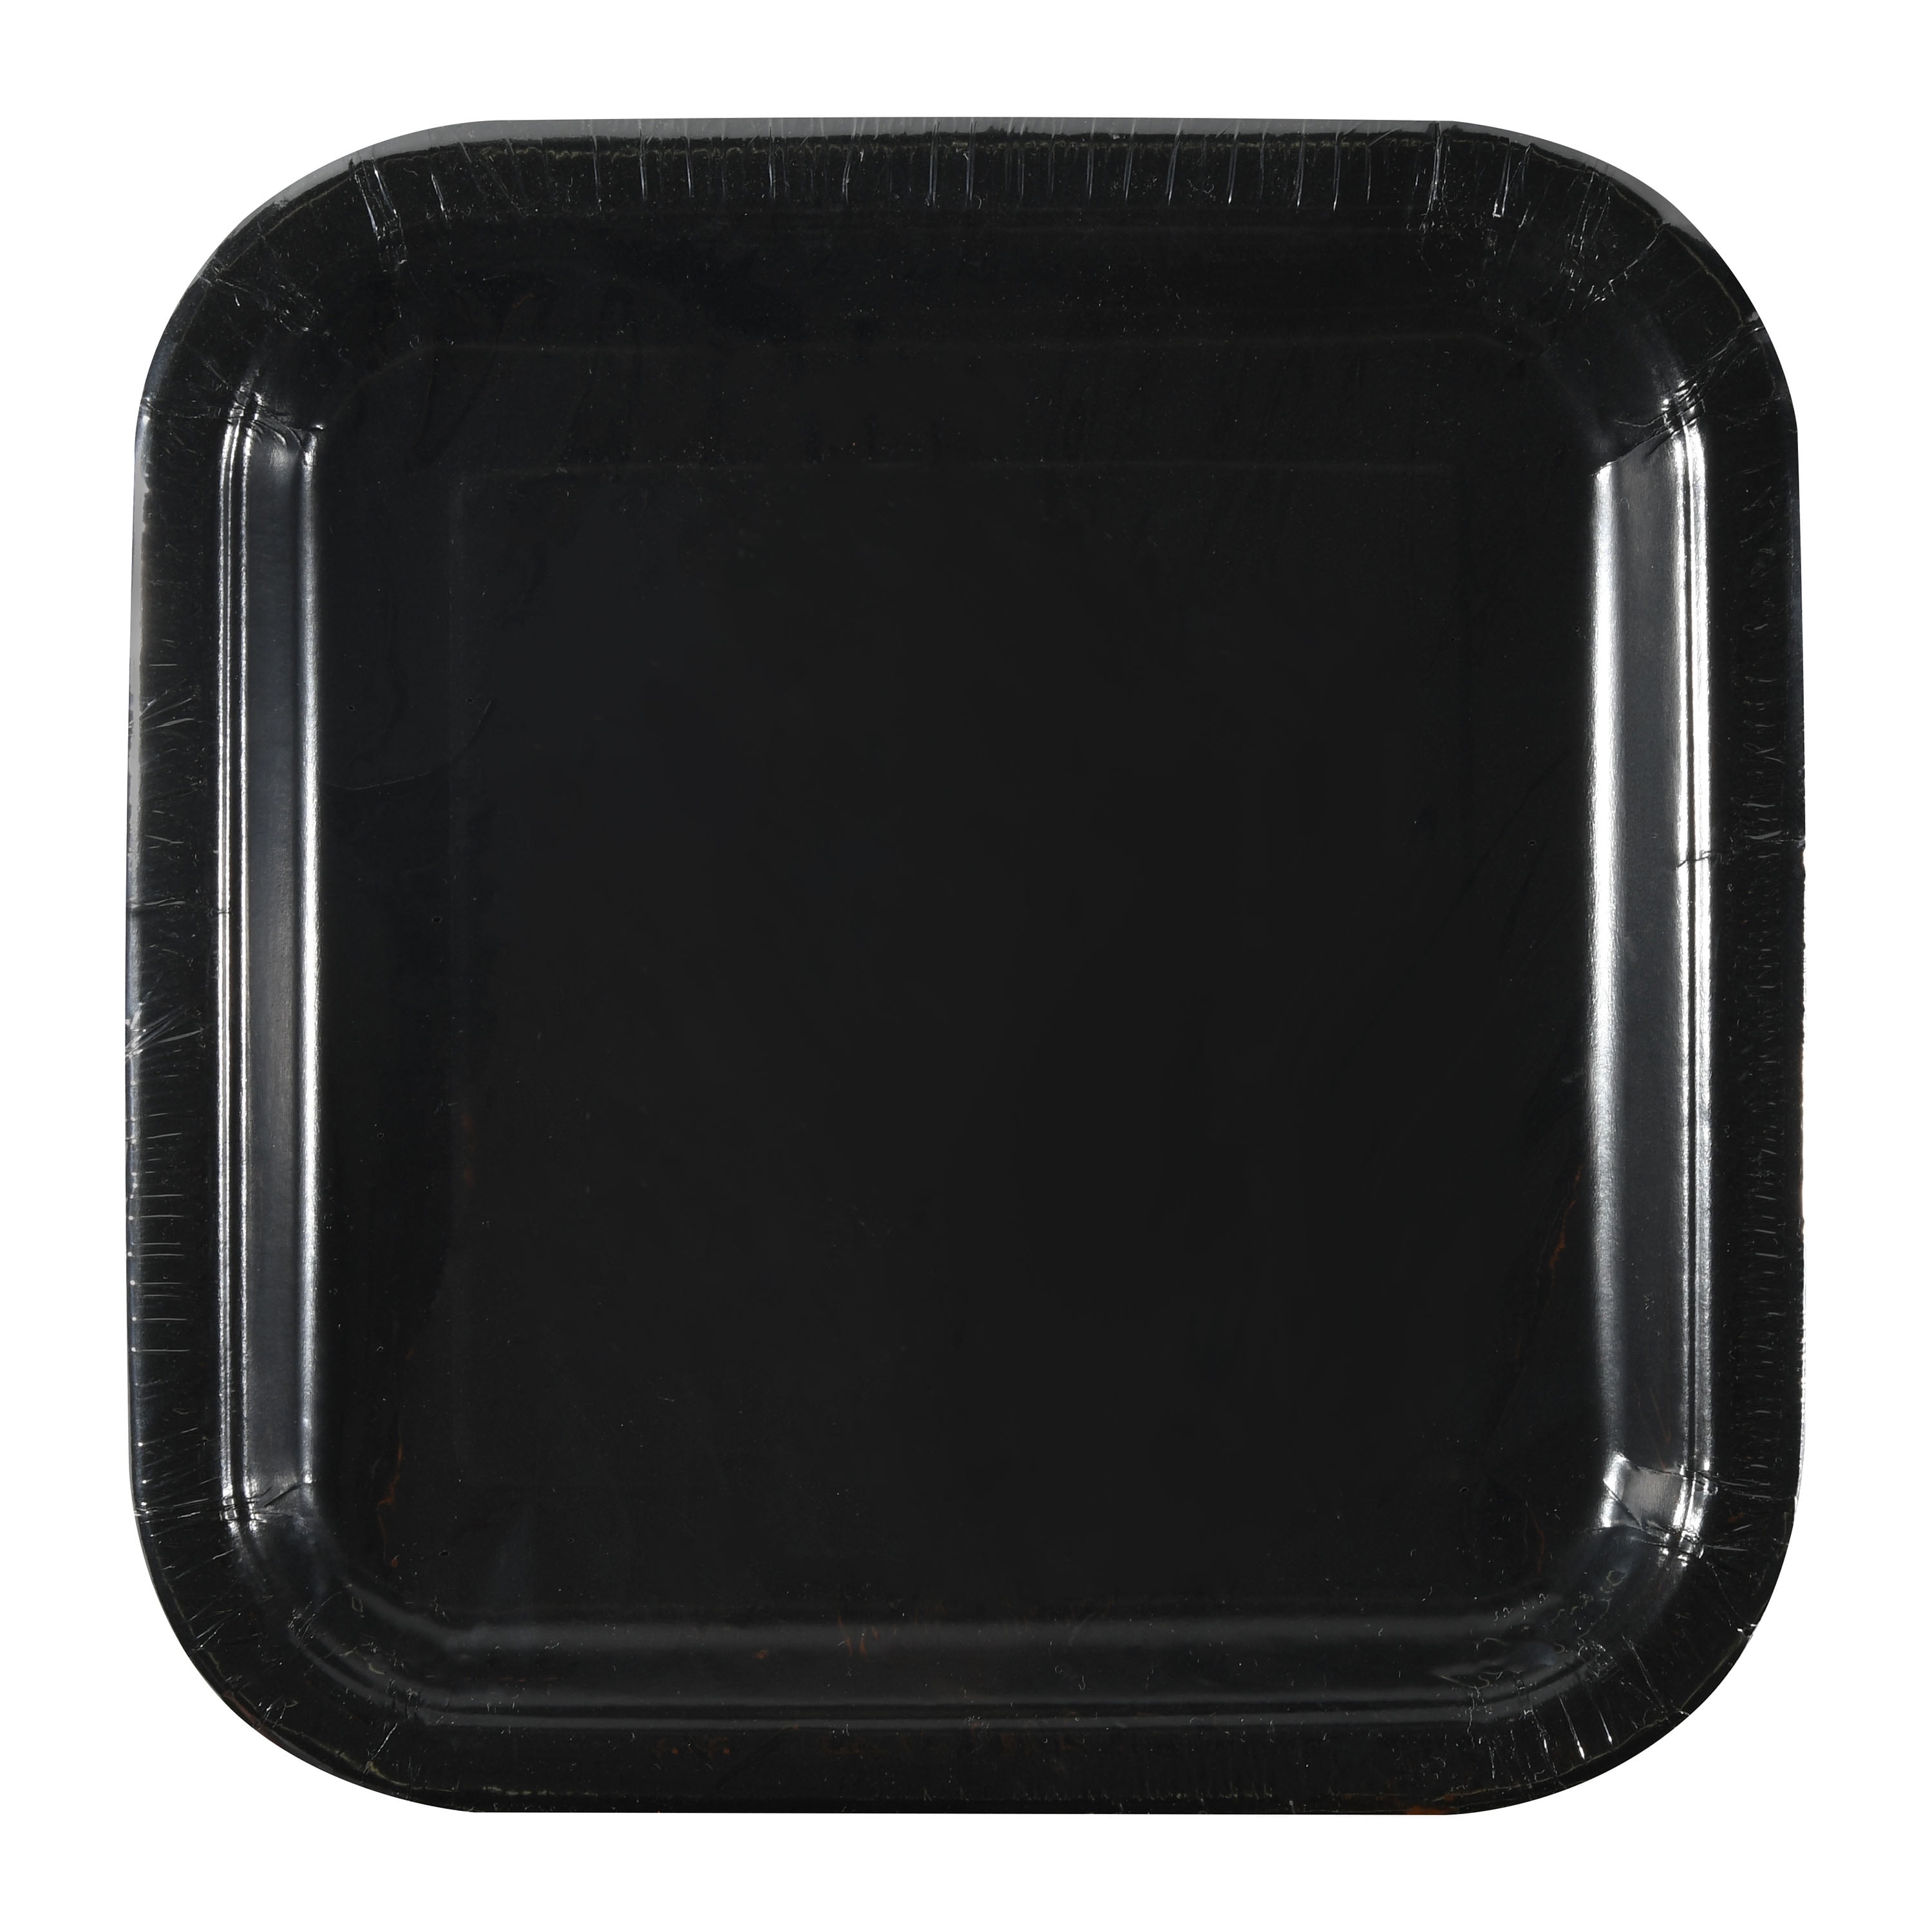 Black Square Disposable Plastic Plate 18cm Party Event BBQ Buffet Great Value!